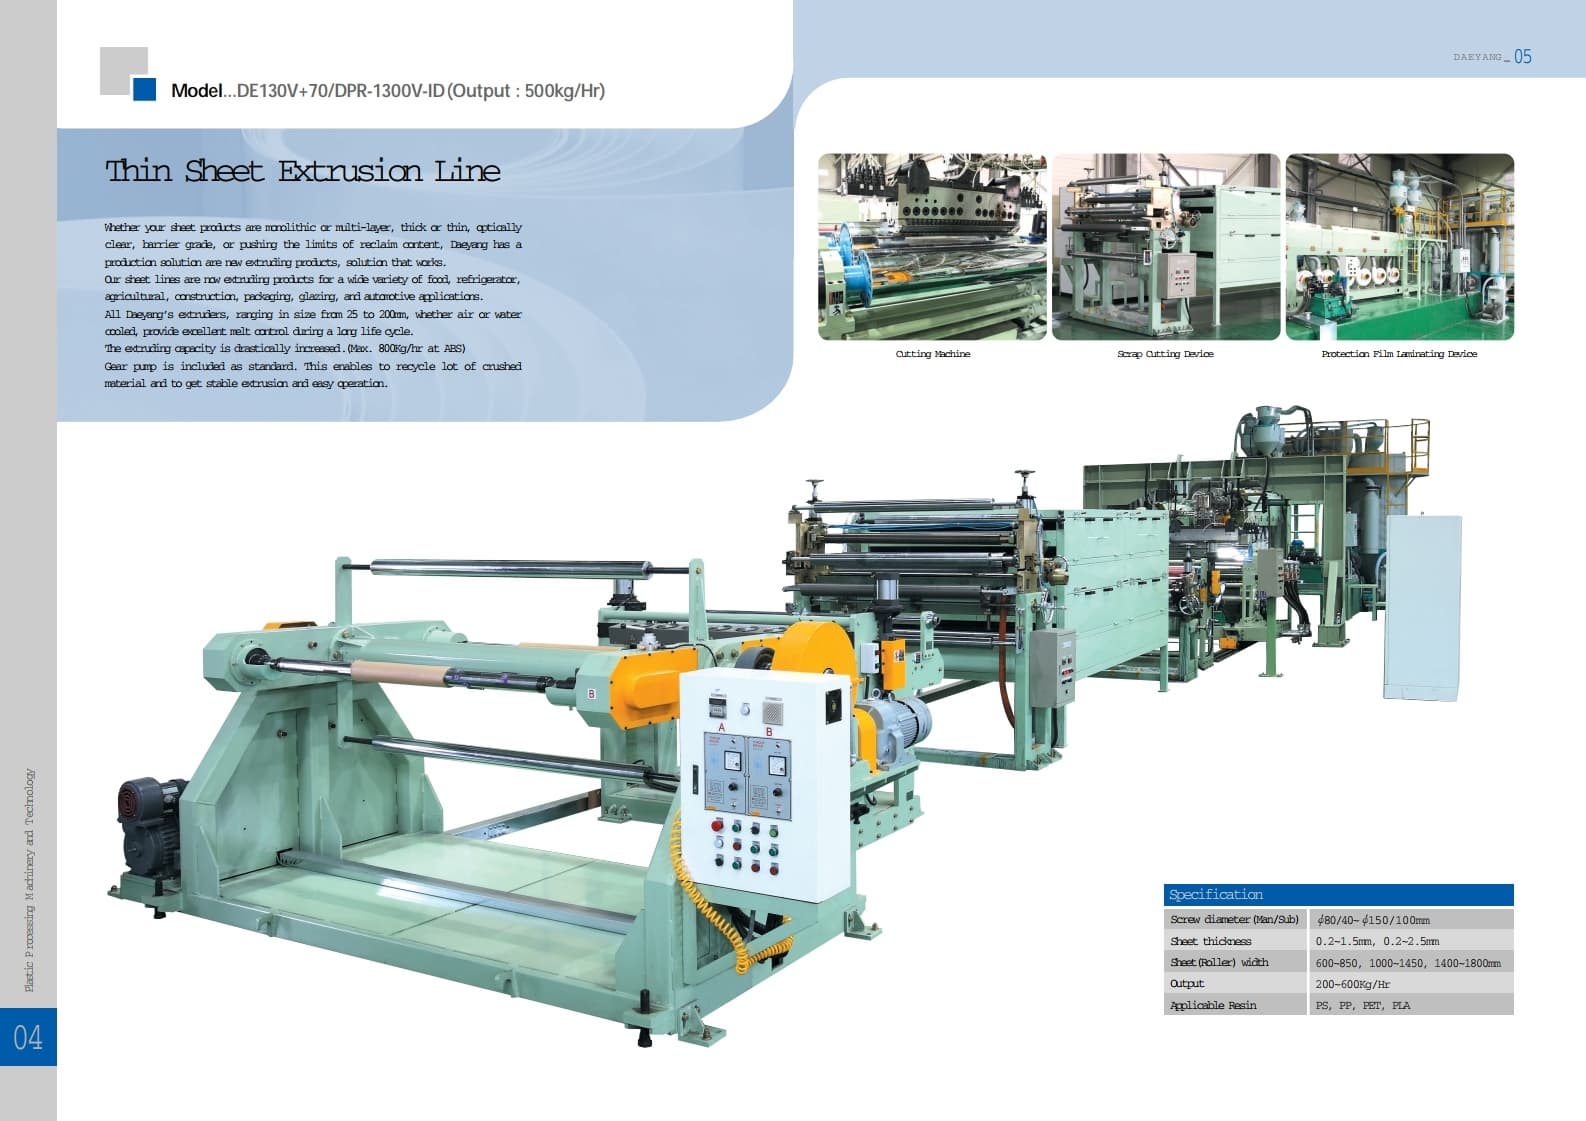 Thin Sheet Extrusion Line